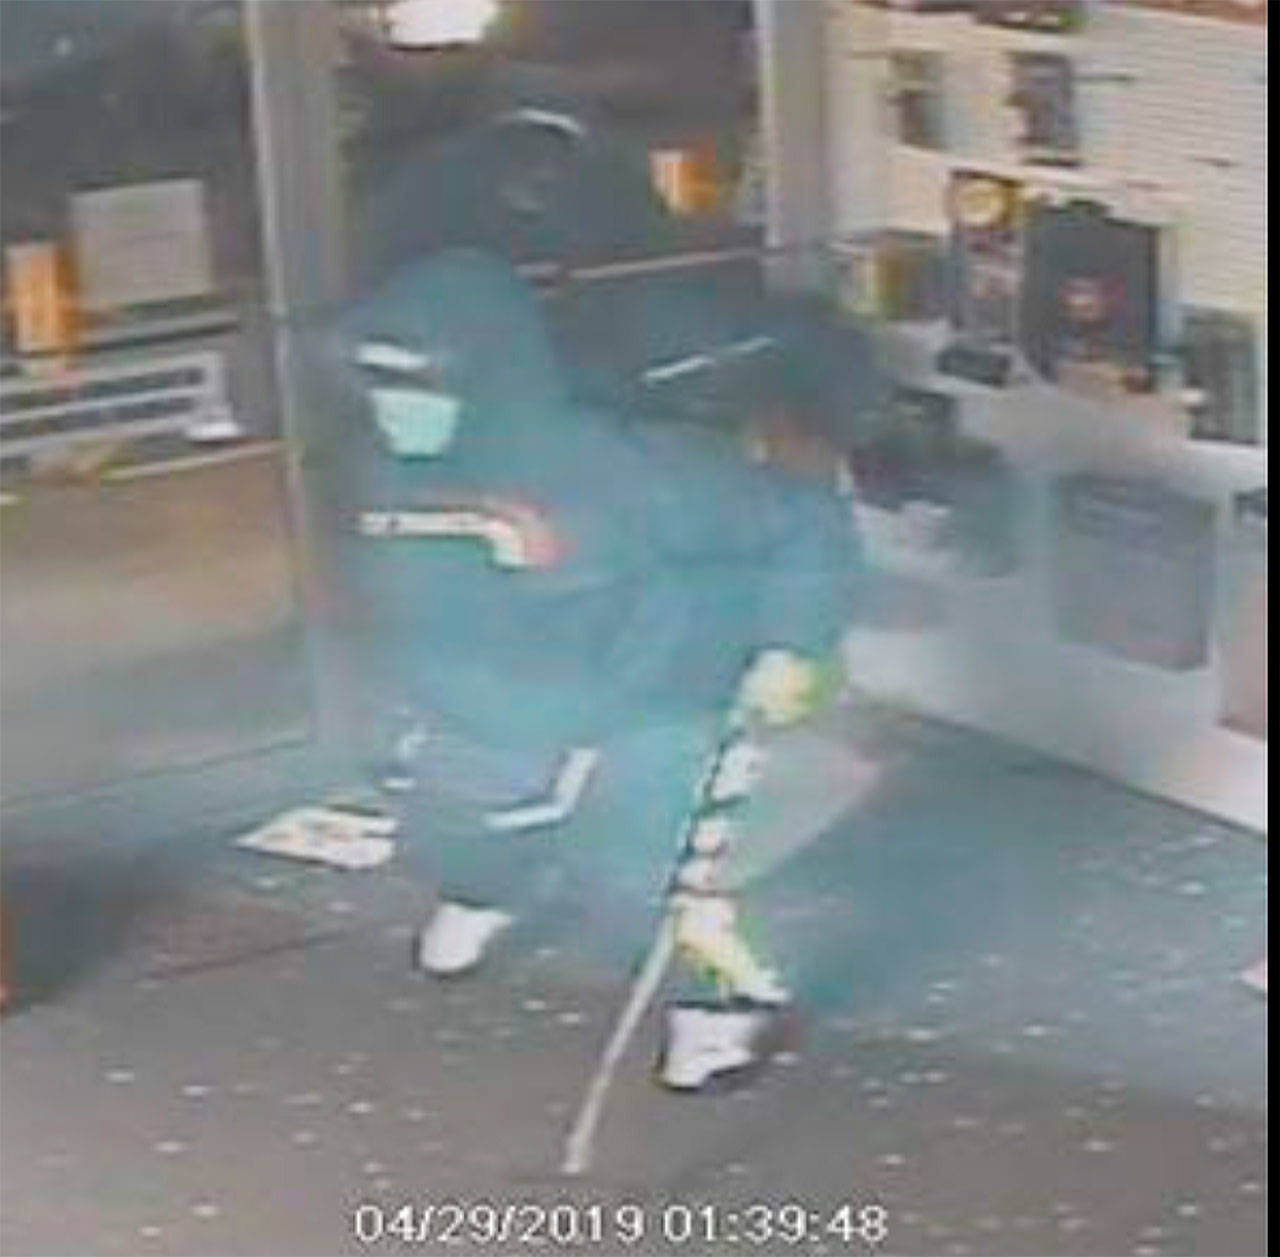 One of the suspects recorded breaking into Boerner Firearms in Gorst was described as being a large-statured individual wearing a sweatshirt with a CDXX logo on the front. (Kitsap County Sheriff’s Office photo)